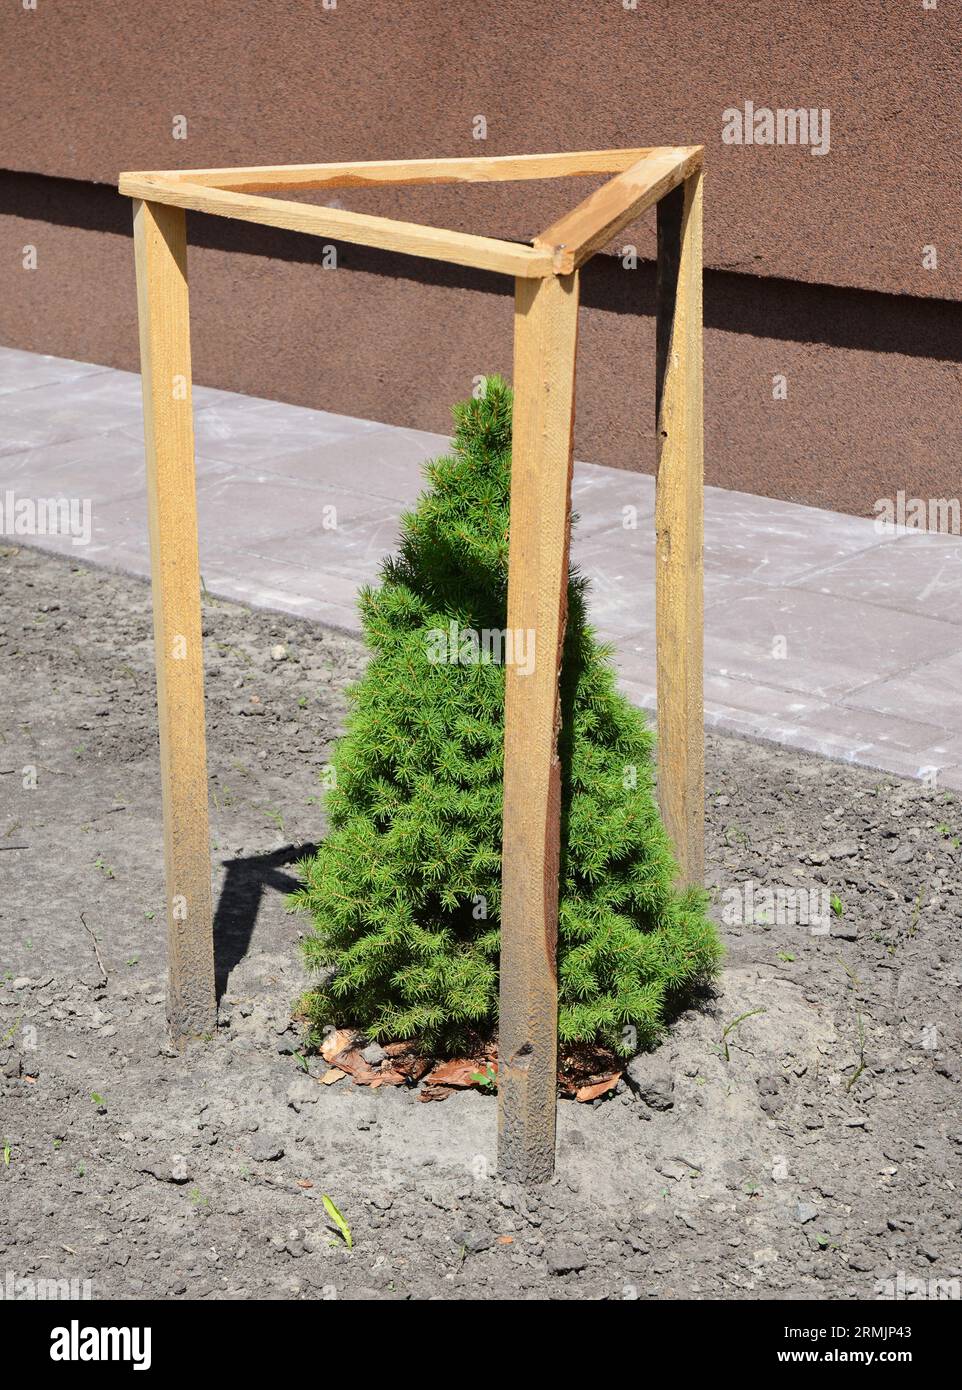 Planting picea glauca 'Conica' near house wall. Picea glauca Conica grows slowly and evenly. Stock Photo